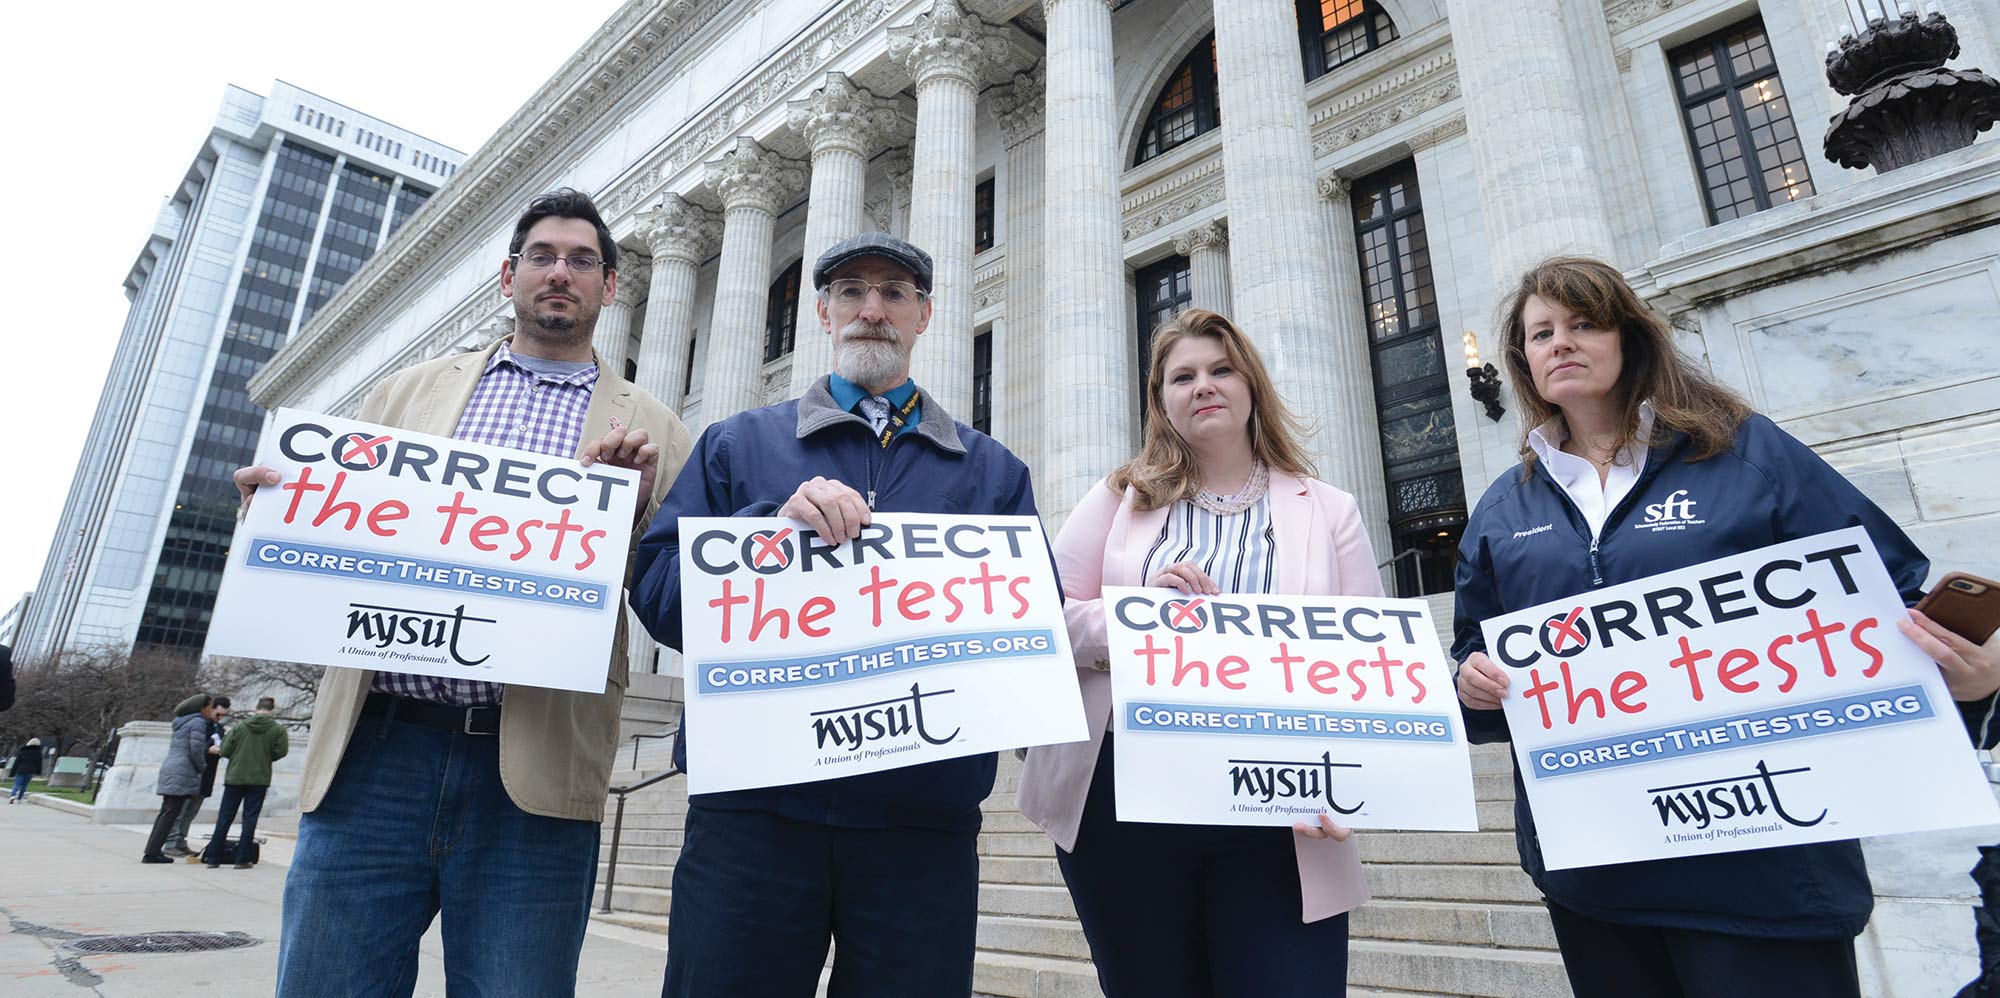 protestors holding signs that say "correct the tests"